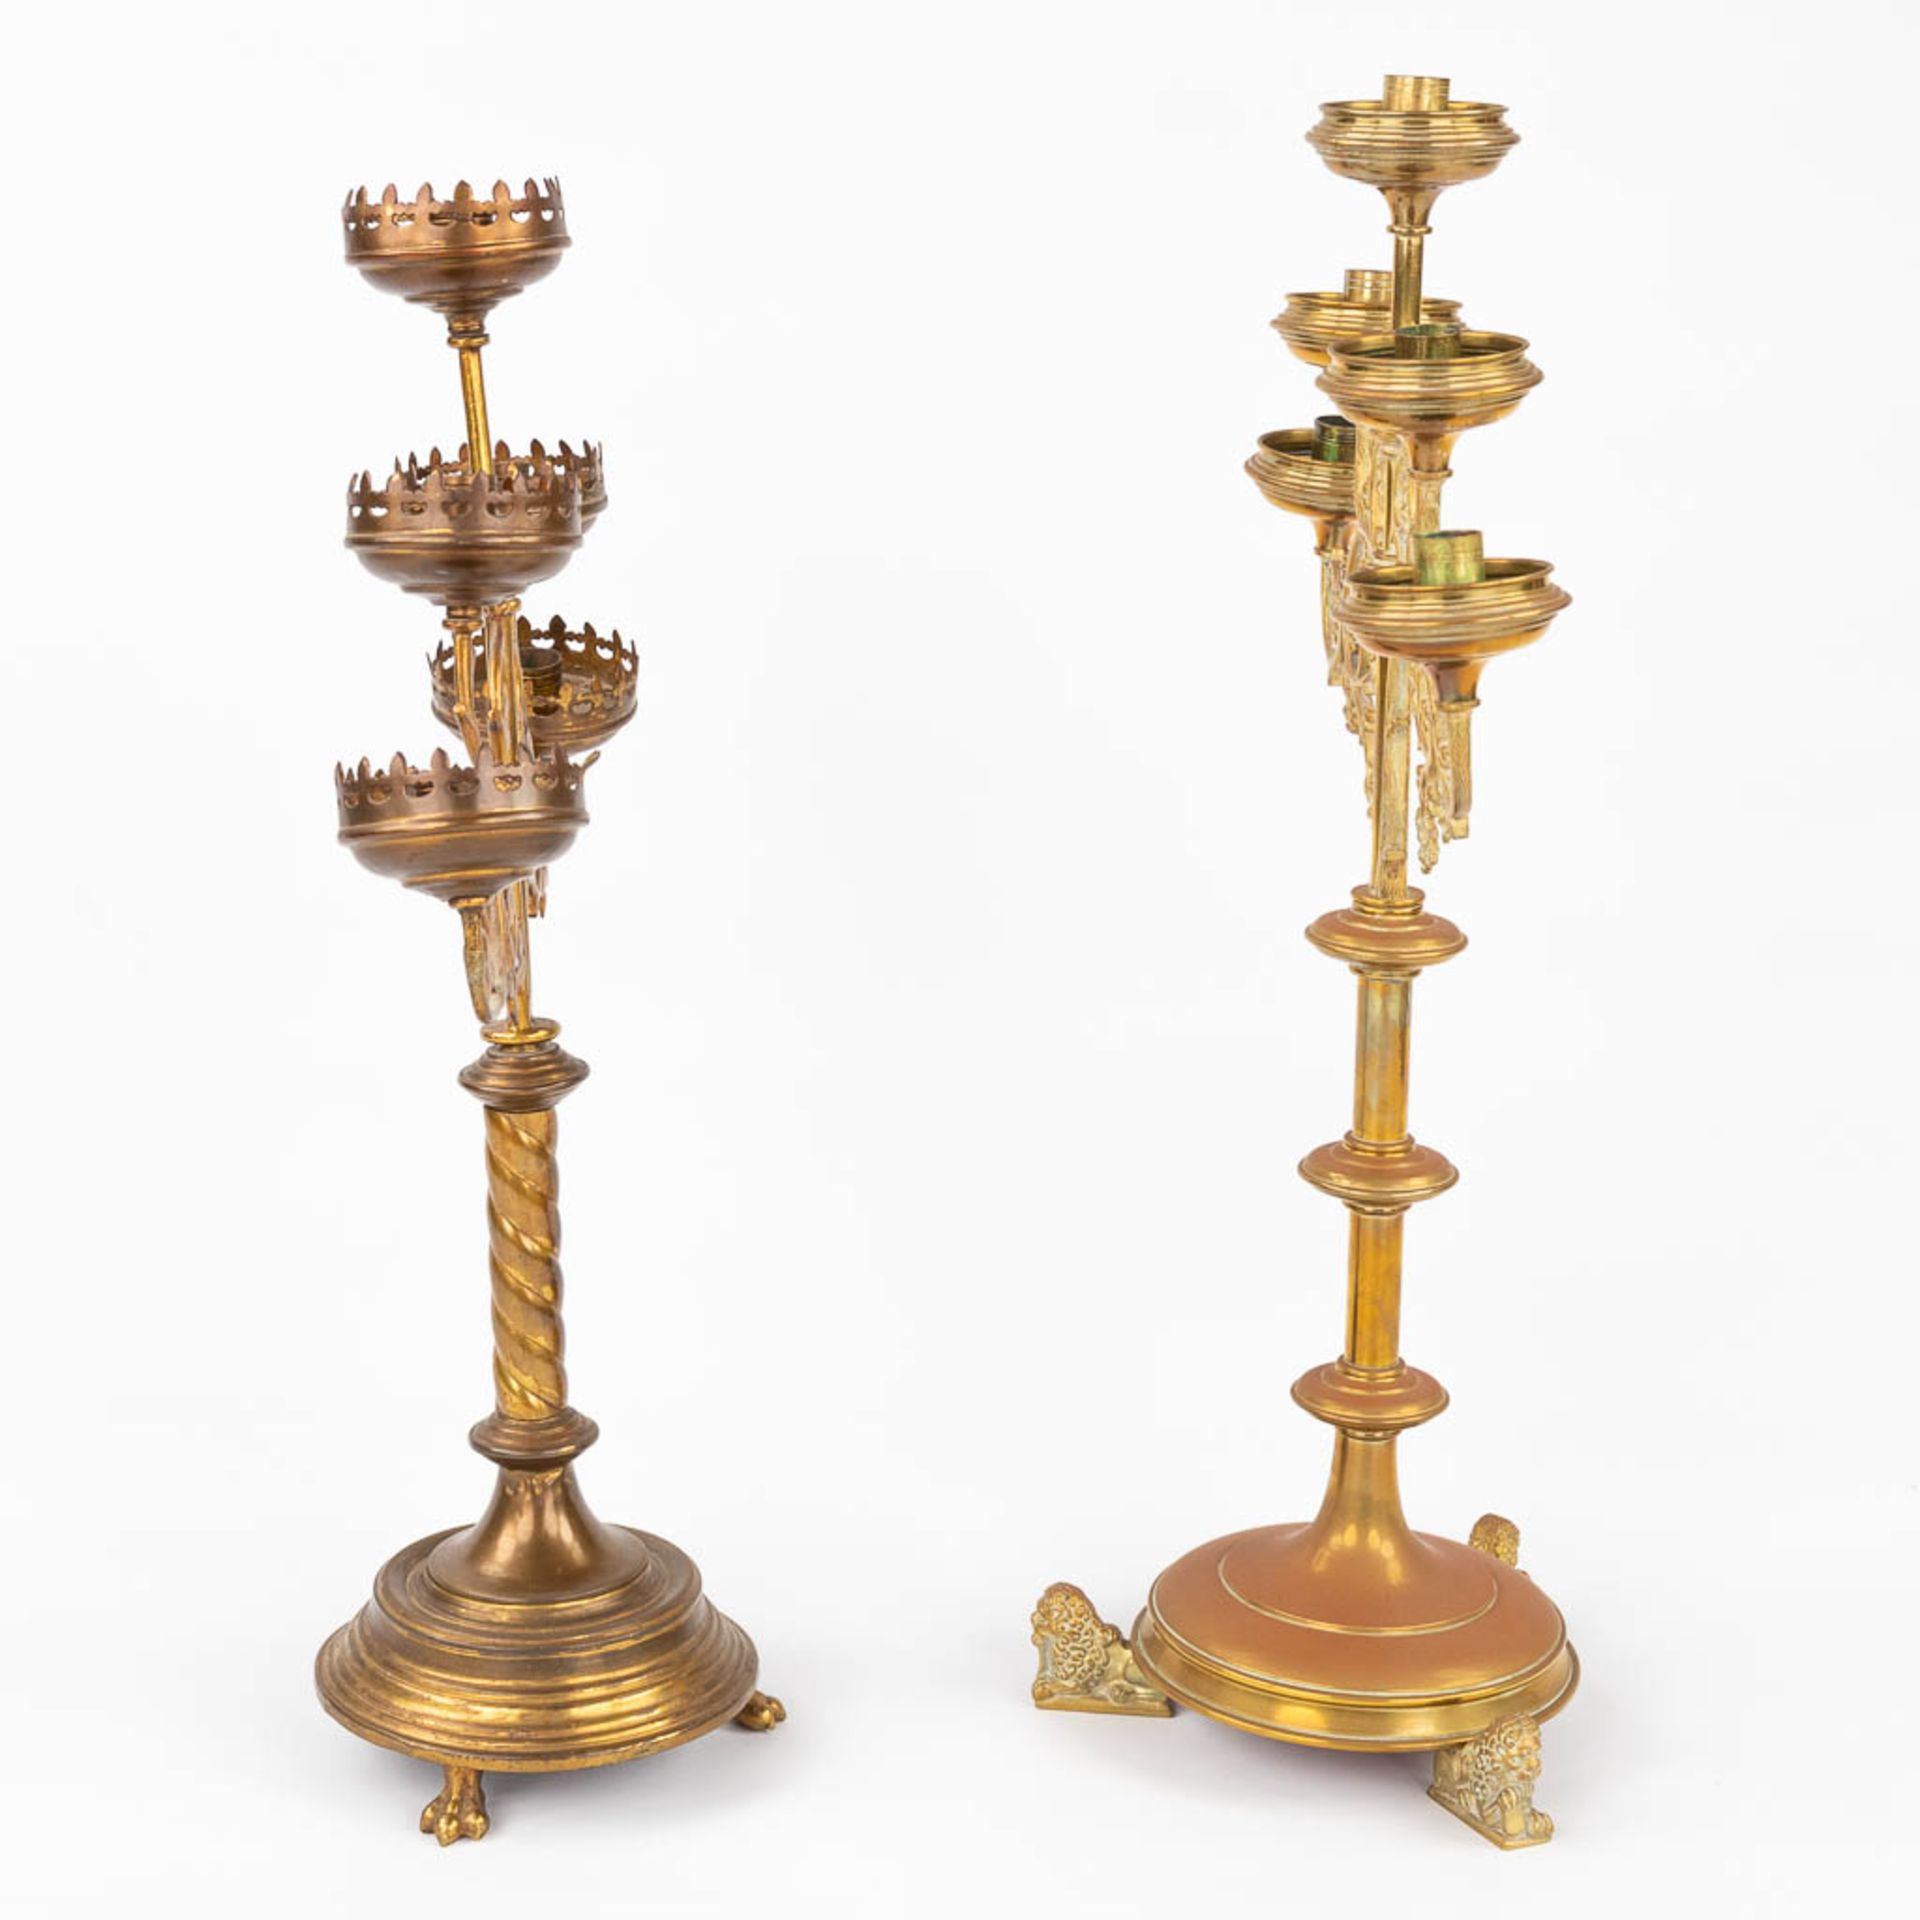 Four Church candlesticks, bronze in a gothic revival style. A pair and two singles. (D:18 x W:51 x H - Image 12 of 18